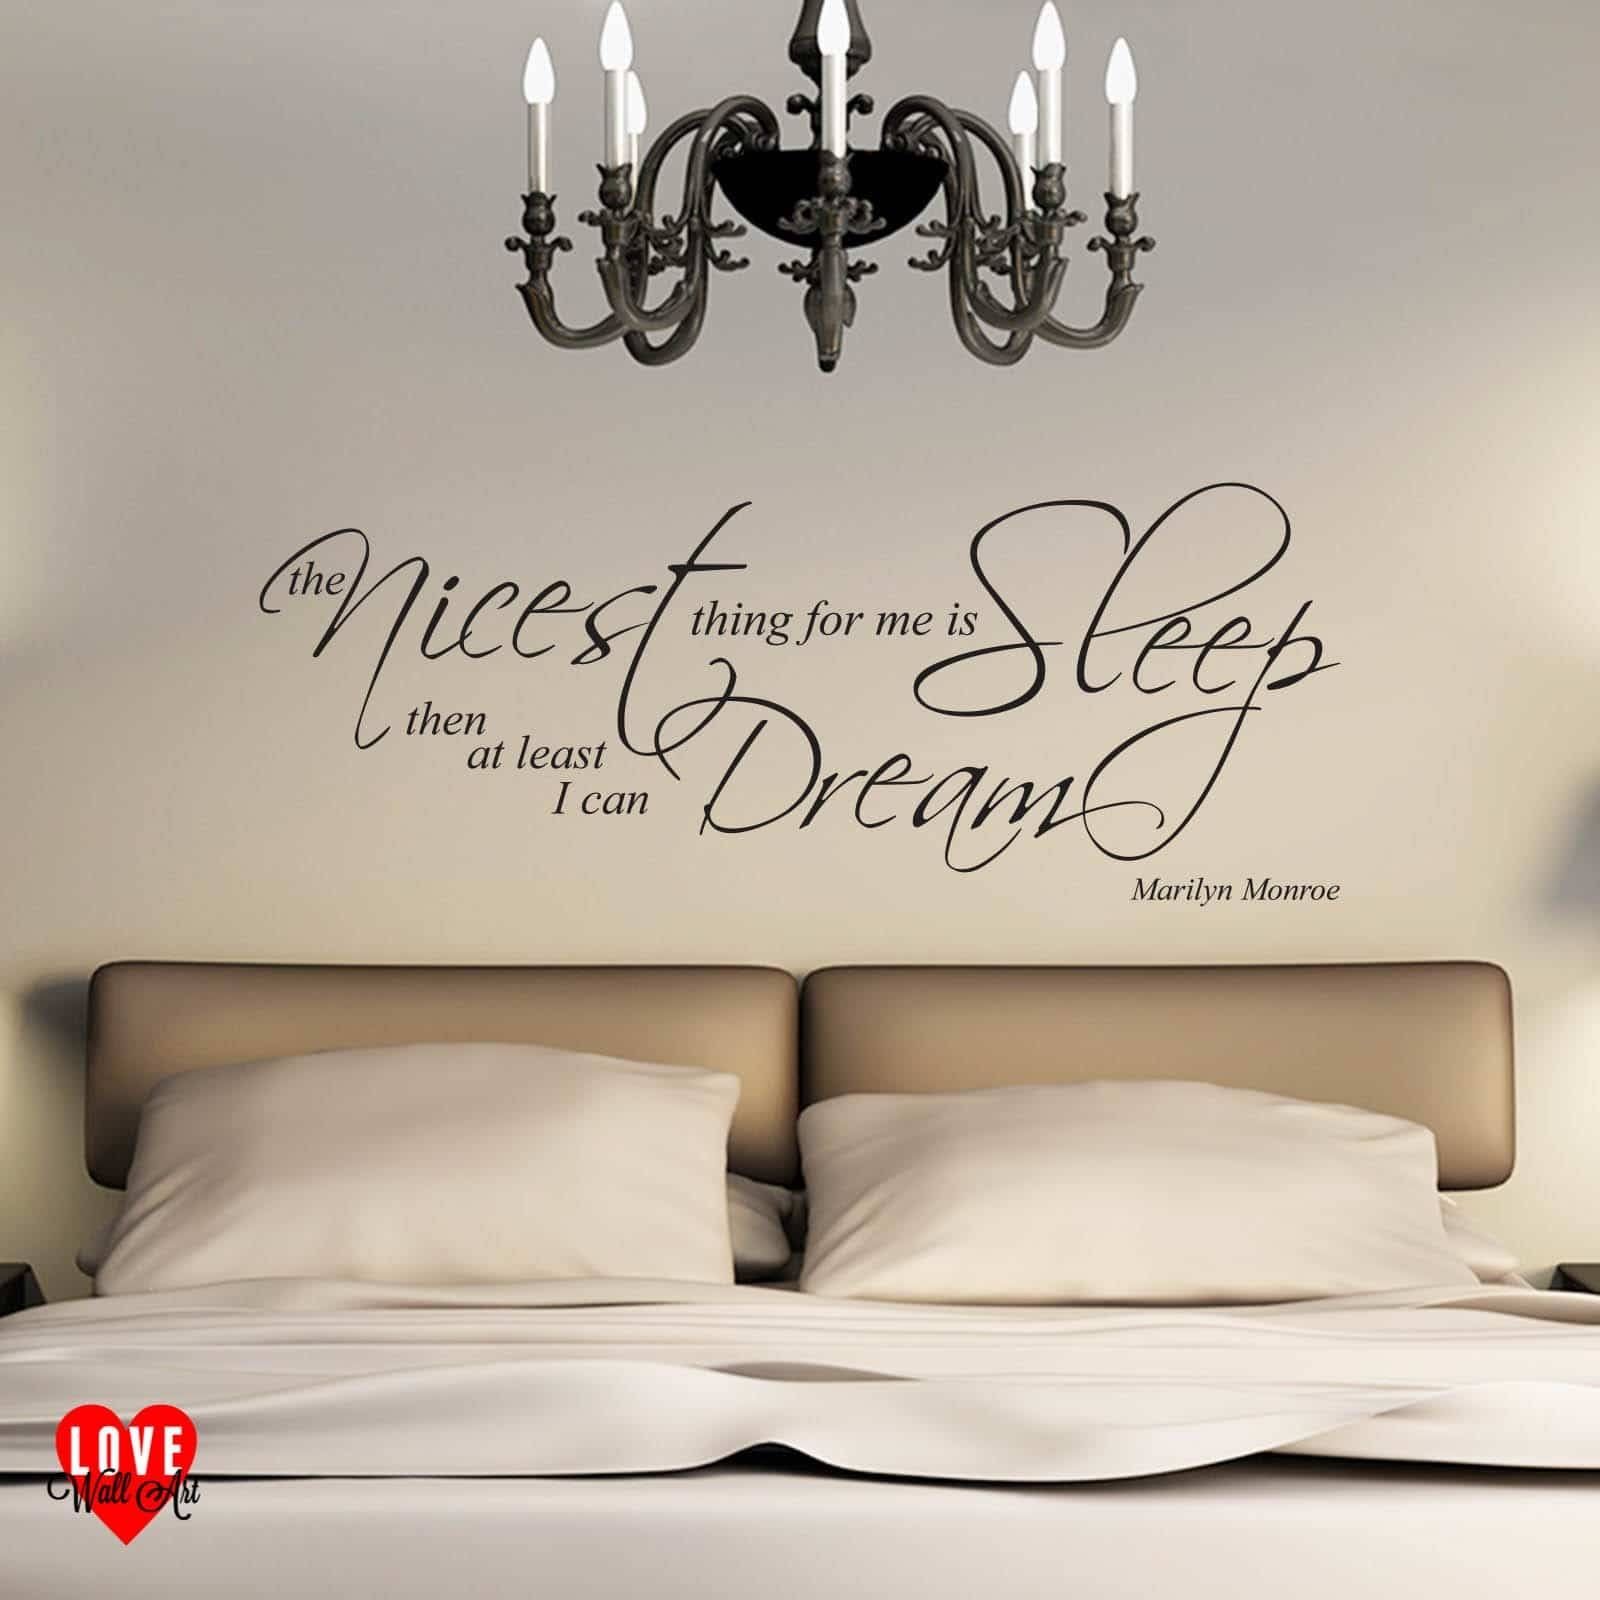 Marilyn Monroe Quote The Nicest Thing For Me Is Sleep Wall Art Pertaining To Most Popular Marilyn Monroe Wall Art (View 6 of 25)